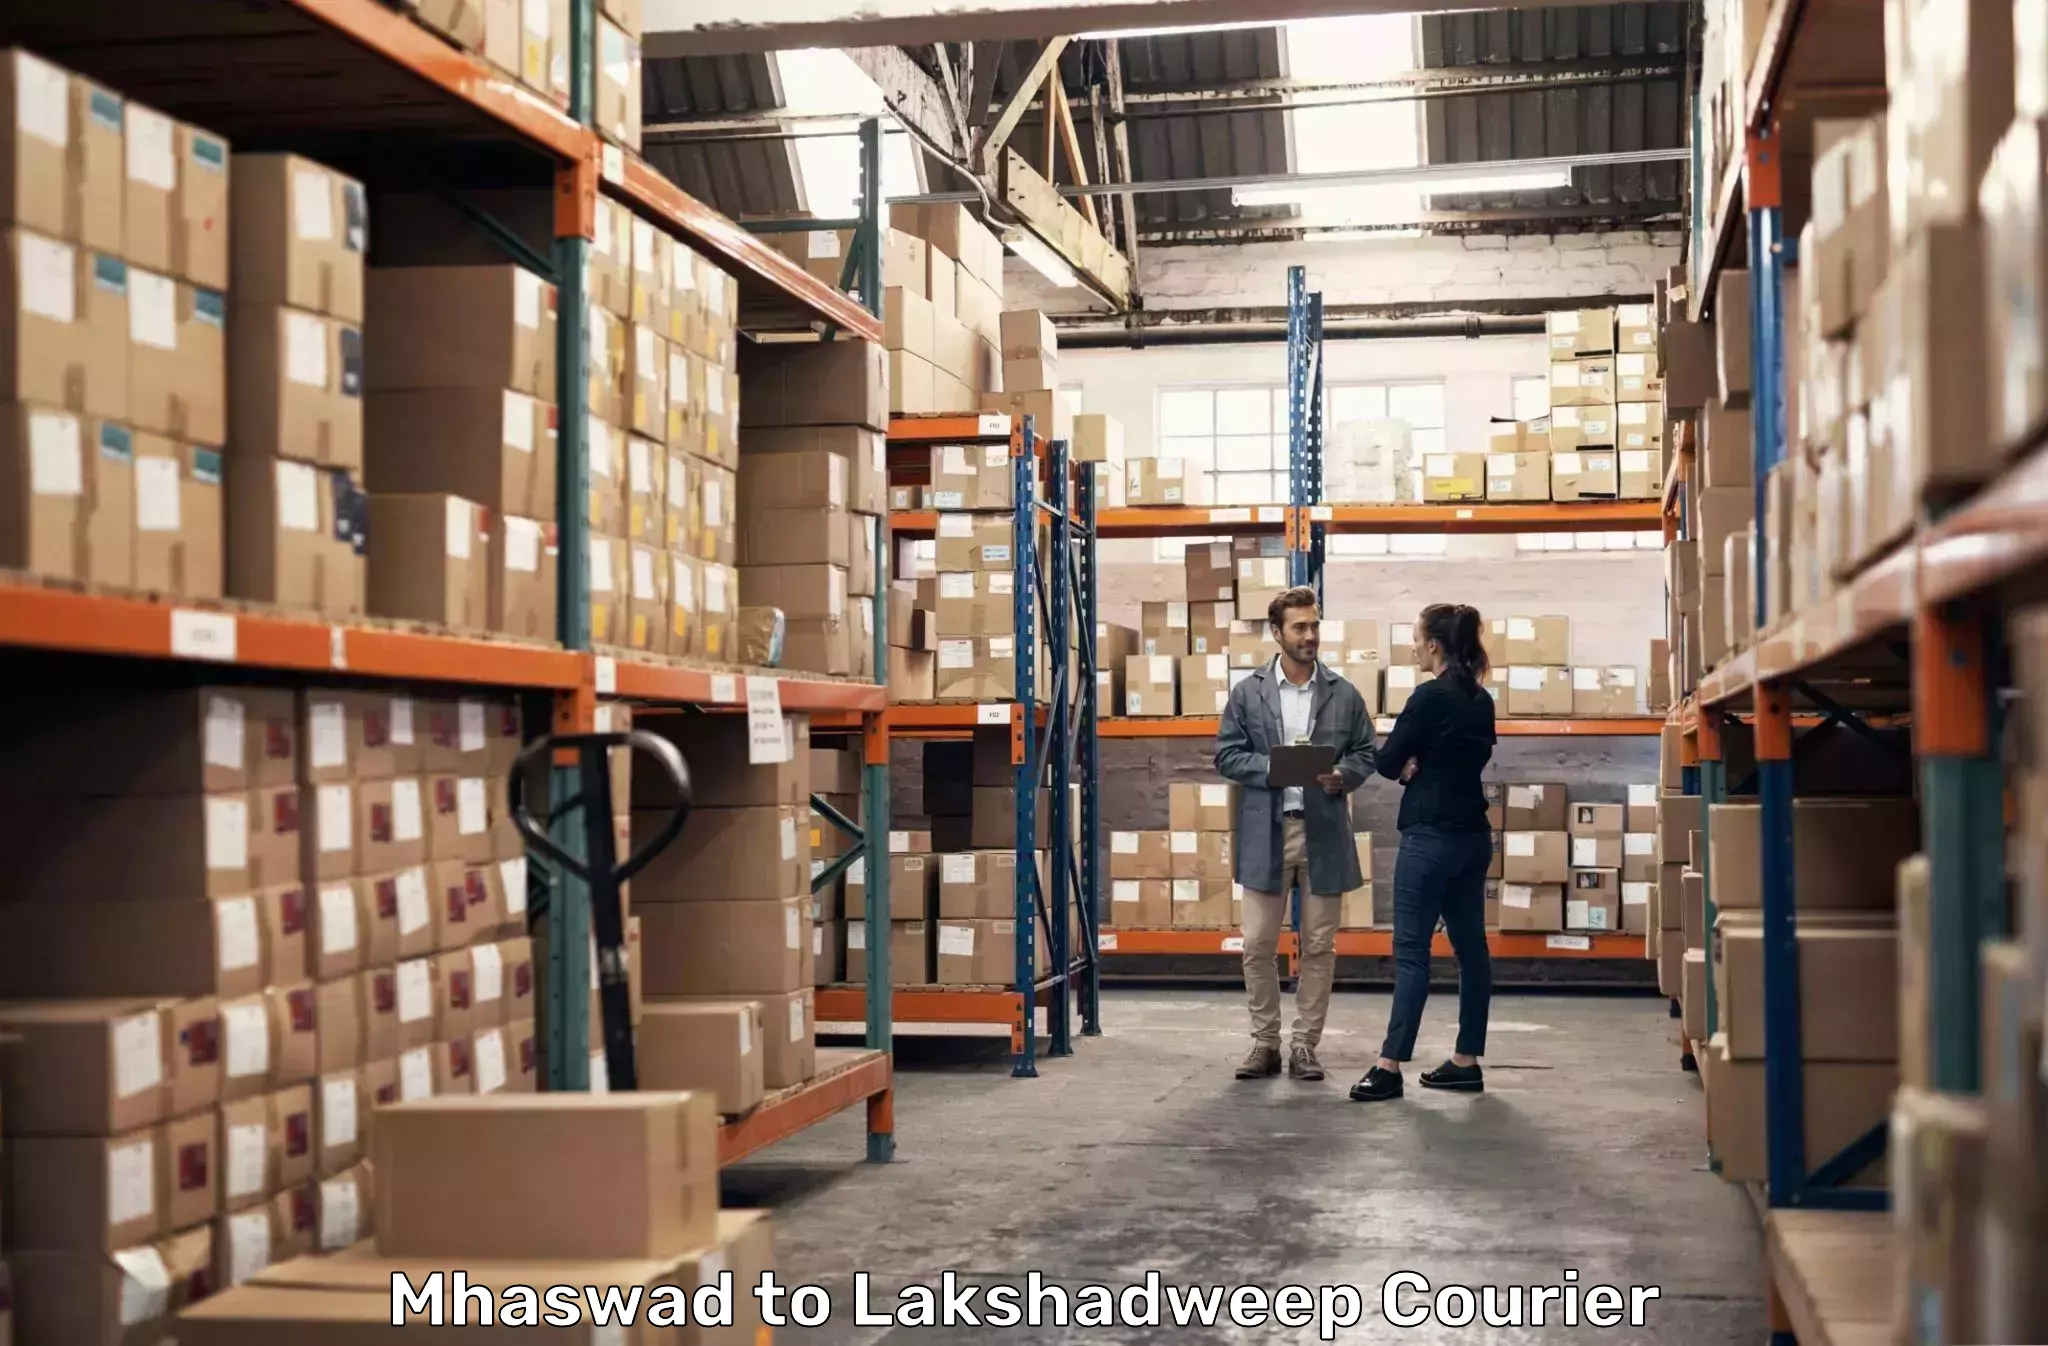 Subscription-based courier Mhaswad to Lakshadweep